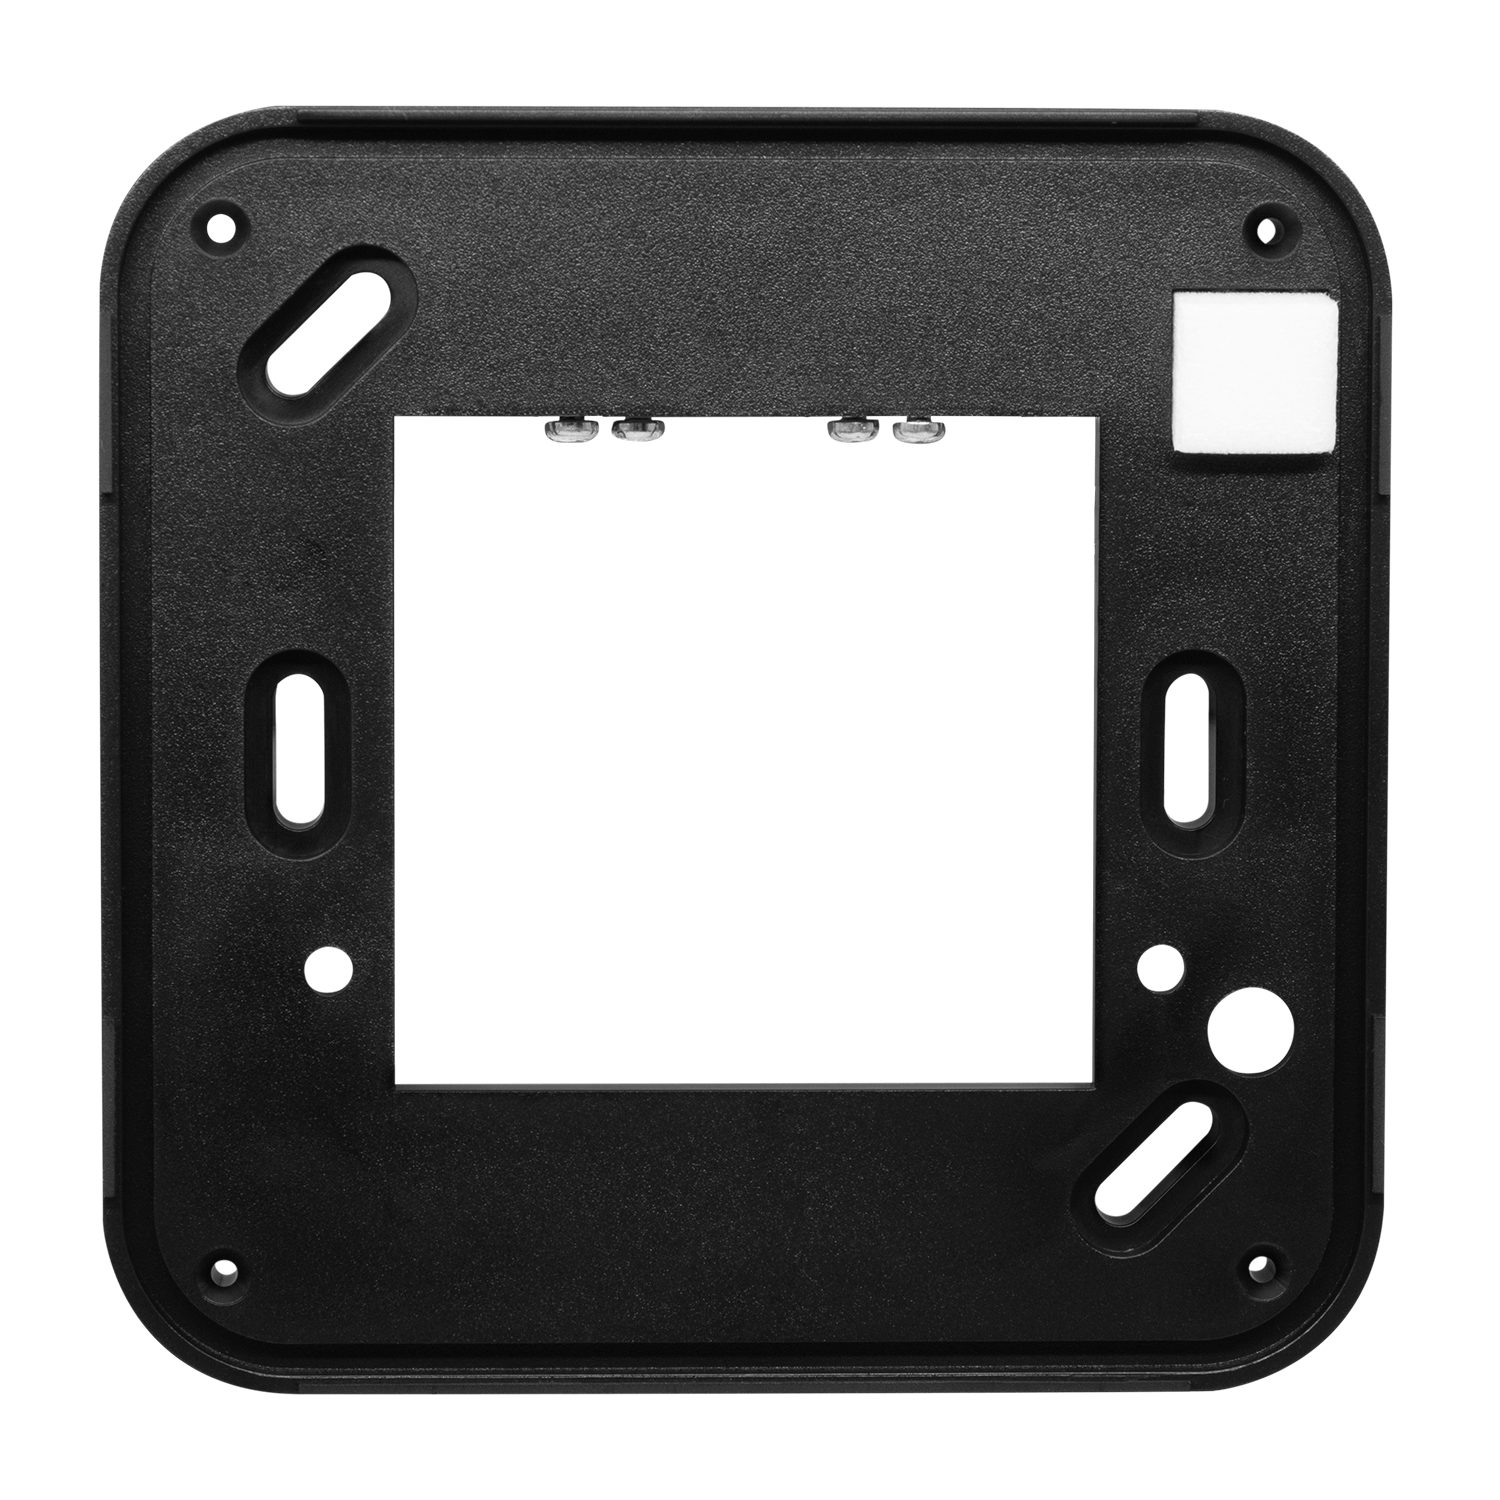 ATS 6 - 6 spacer for access control reader, black